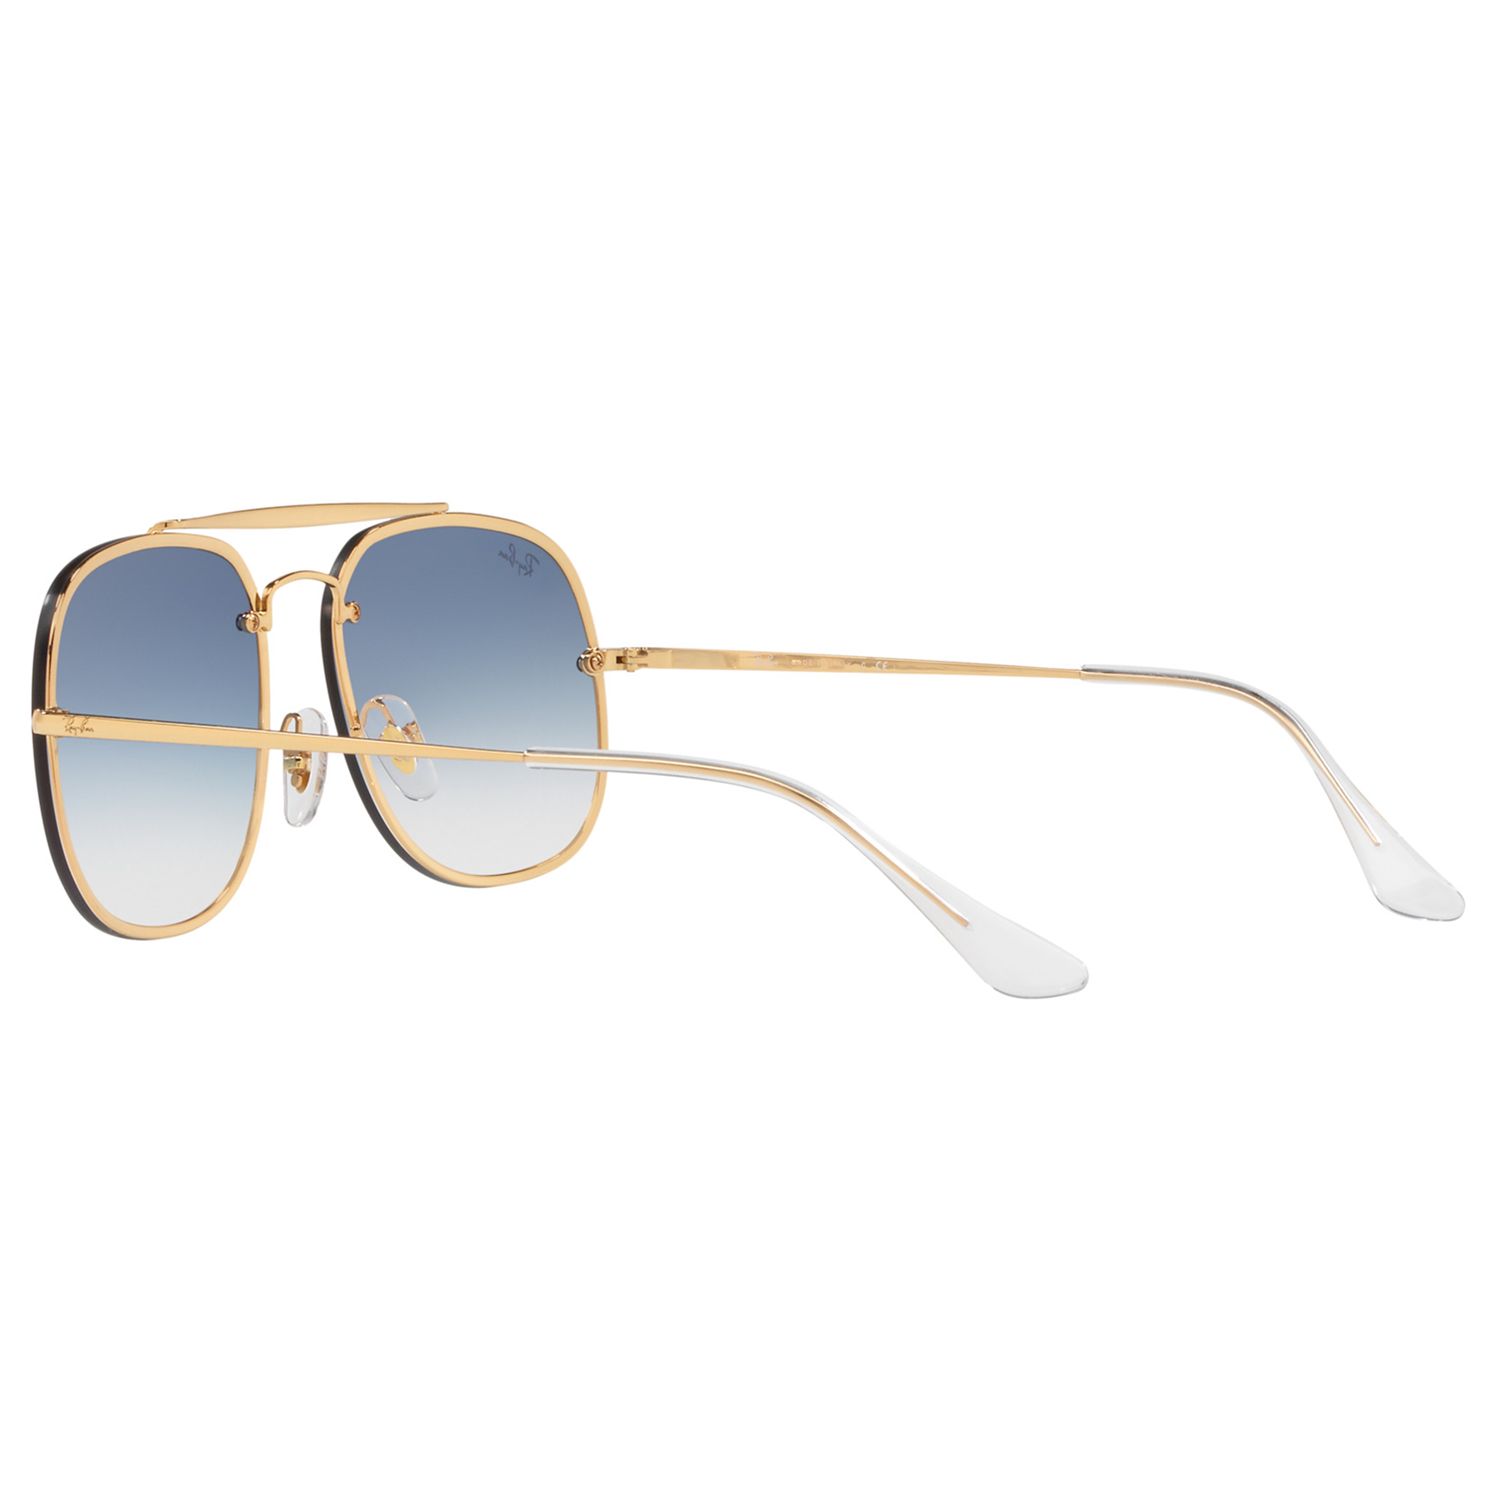 Buy Ray-Ban RB3583 Unisex Square Sunglasses Online at johnlewis.com